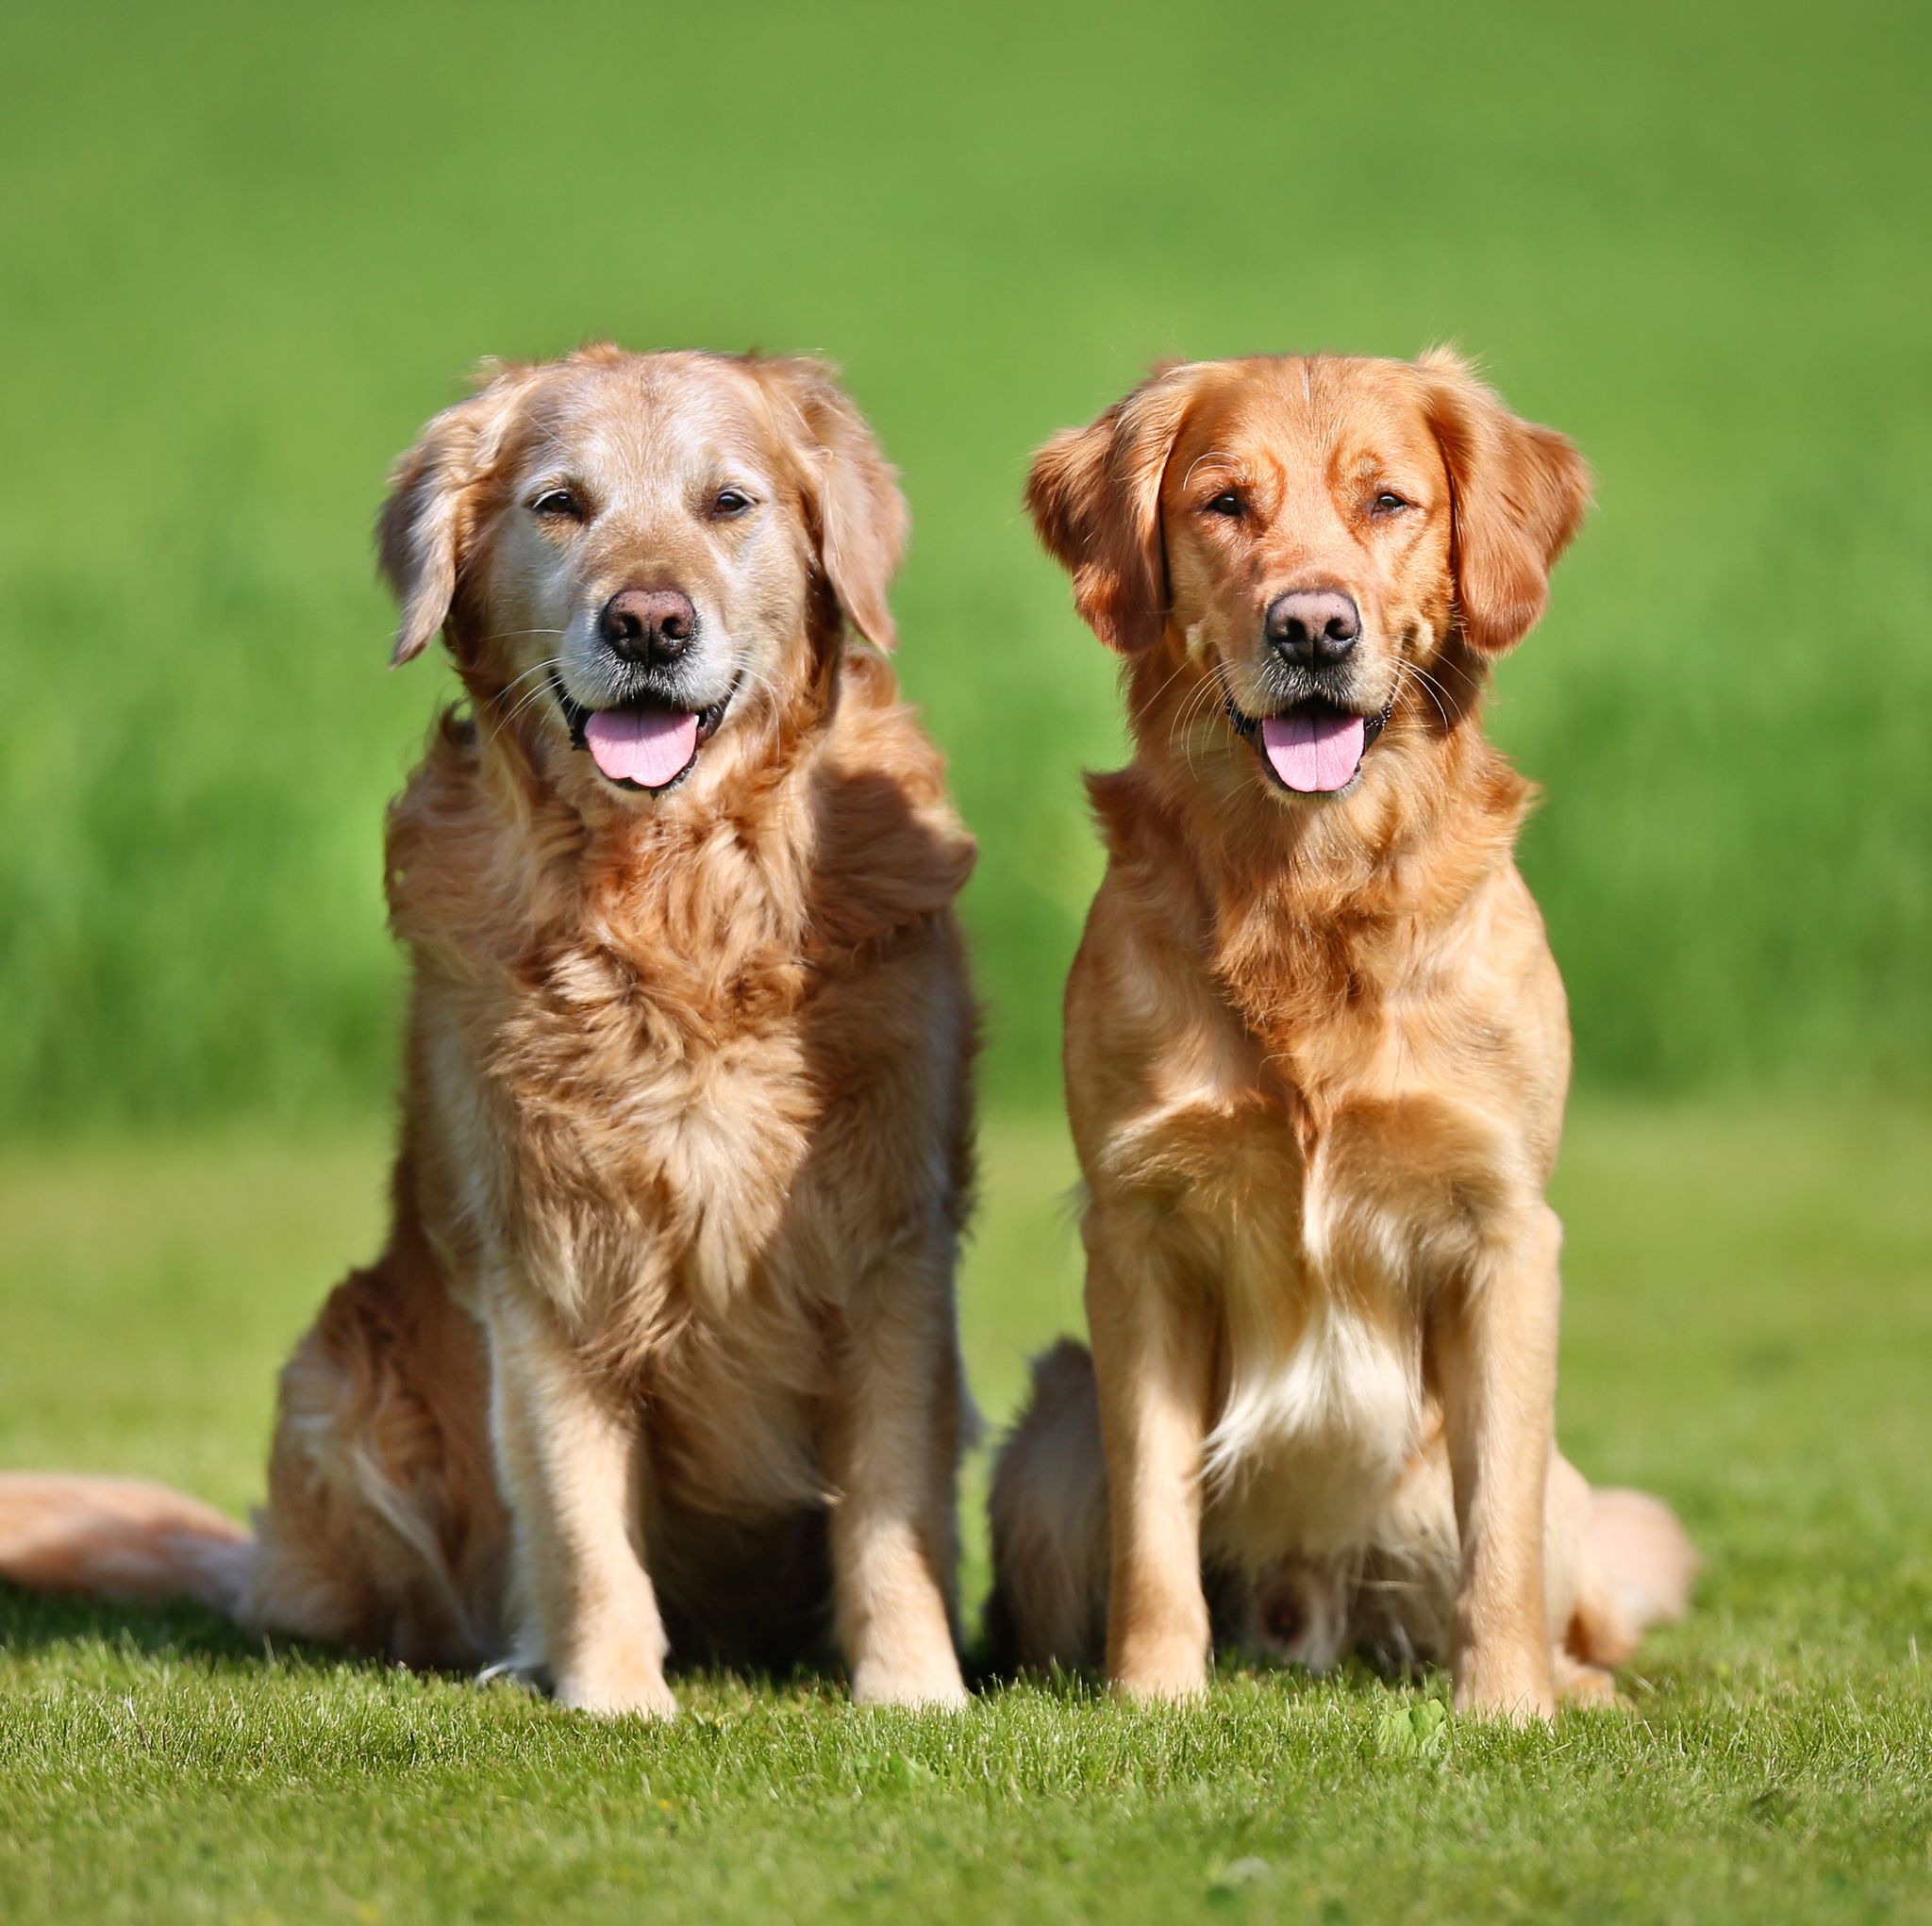 Get Paid £32,000 To Look After 2 Golden Retrievers In Kensington